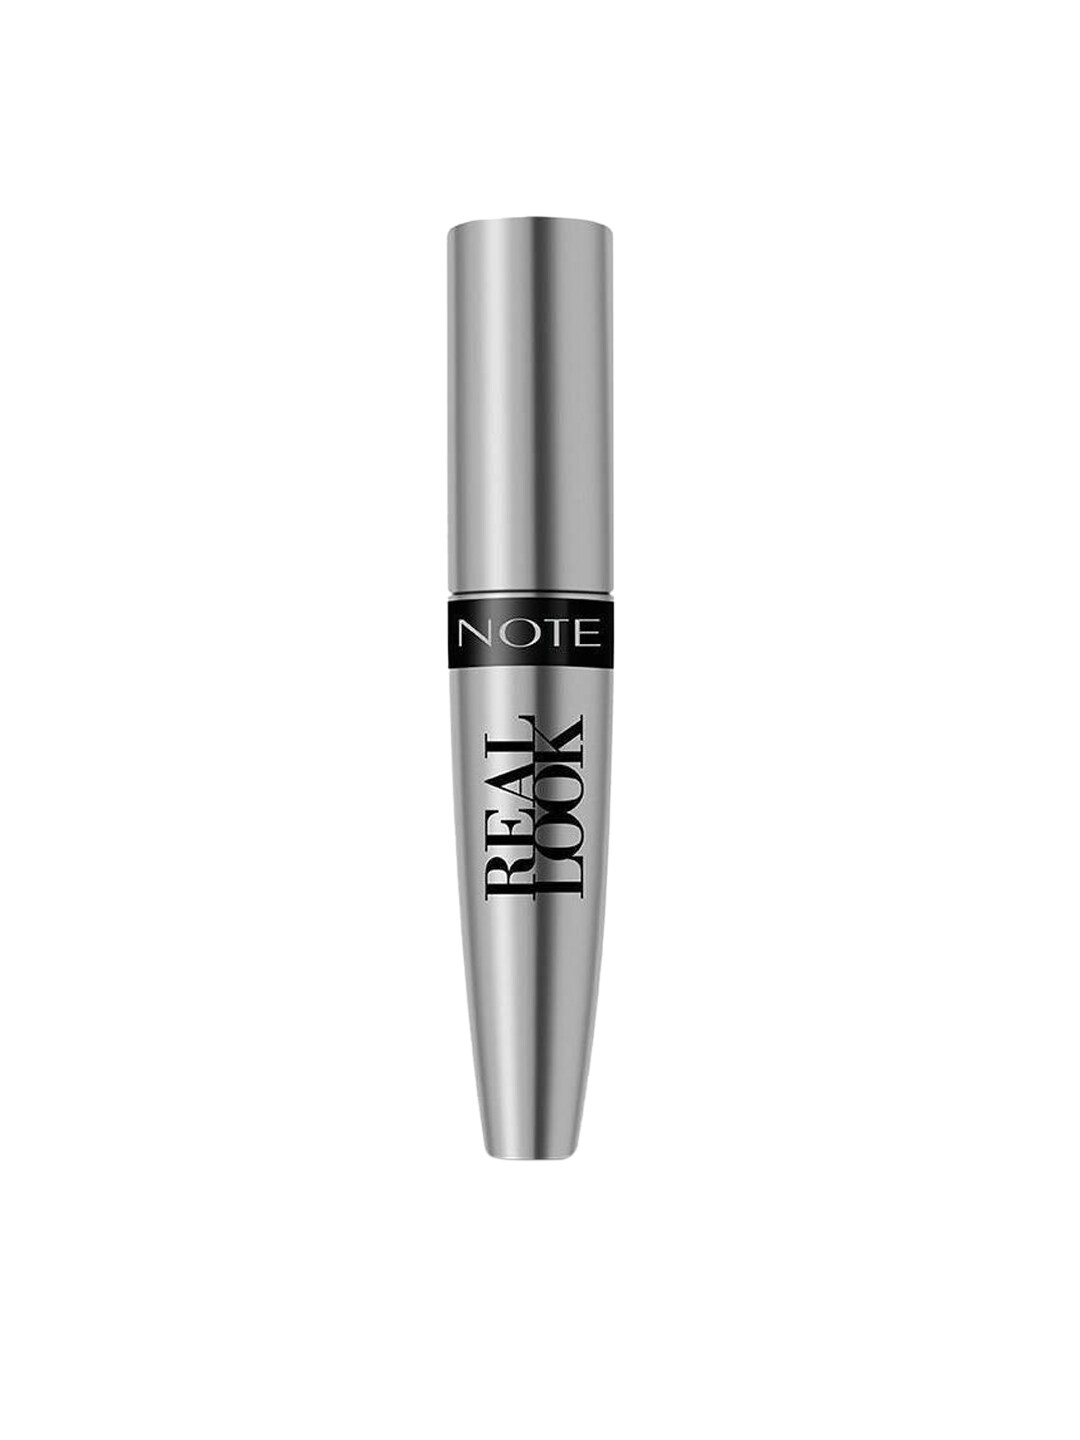 Note Real Look Mascara 12 ml Price in India